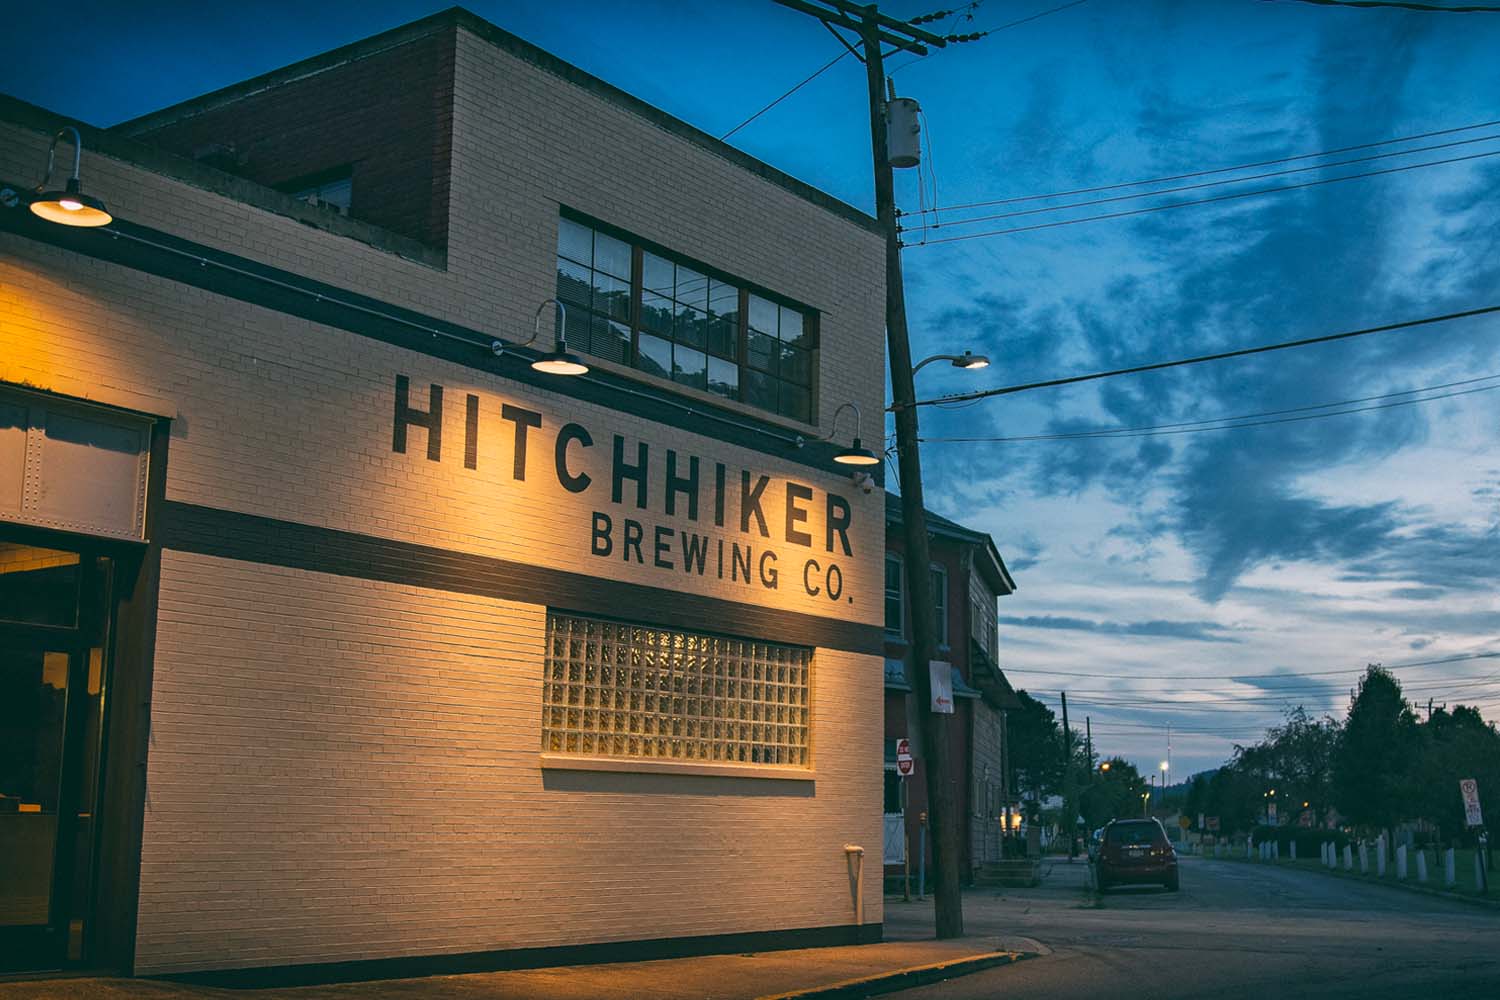 Hitchhiker Brewing Co.